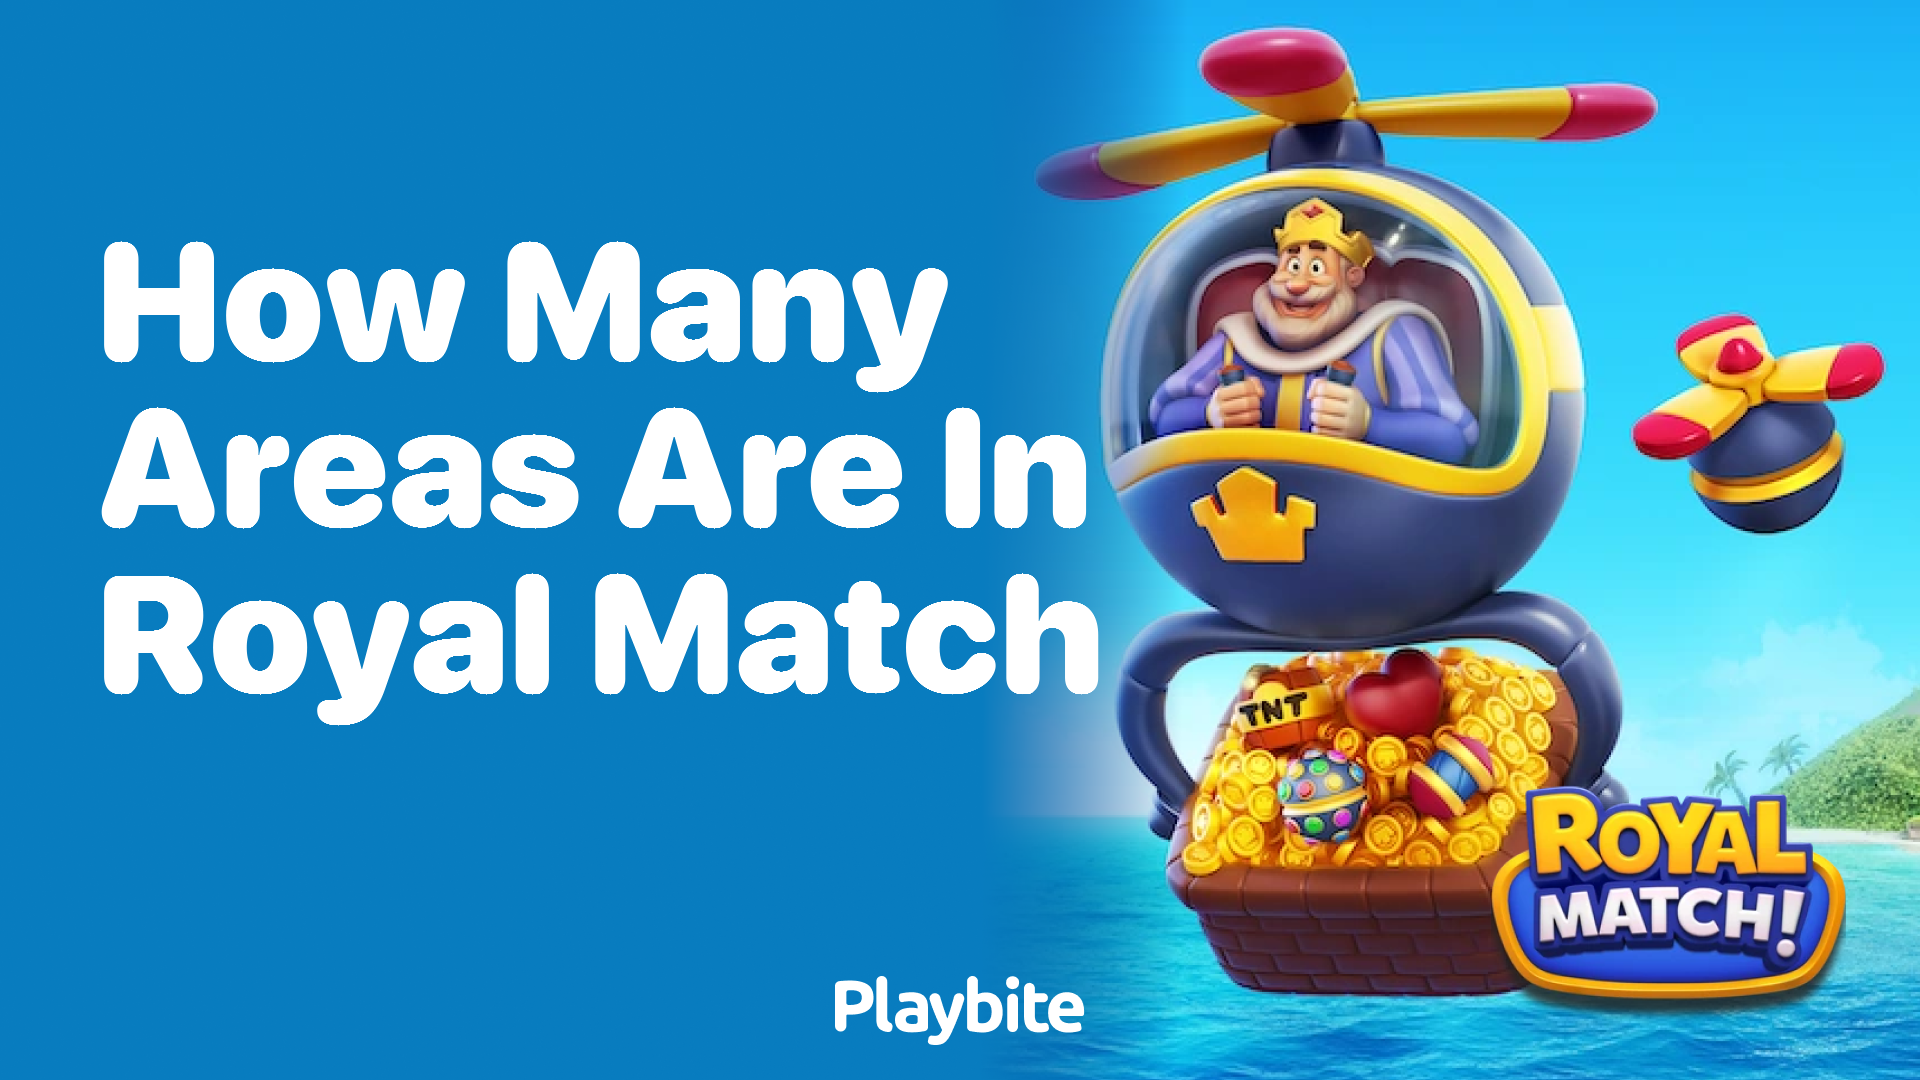 How Many Areas Are in Royal Match?